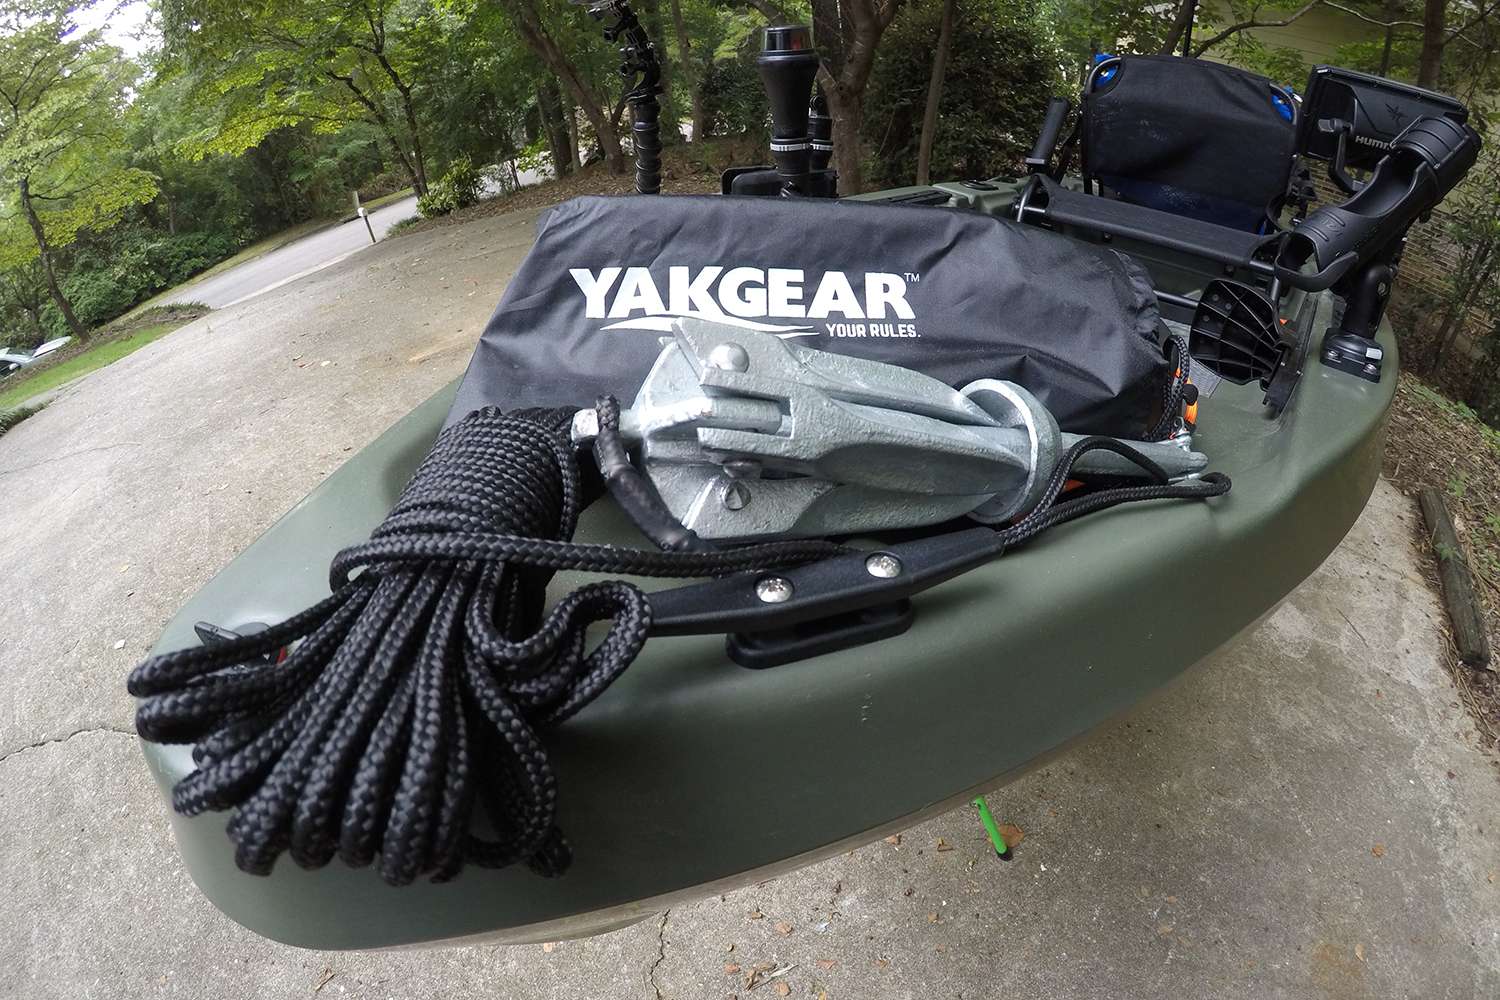 The YakGear anchor is compact, yet effective. 